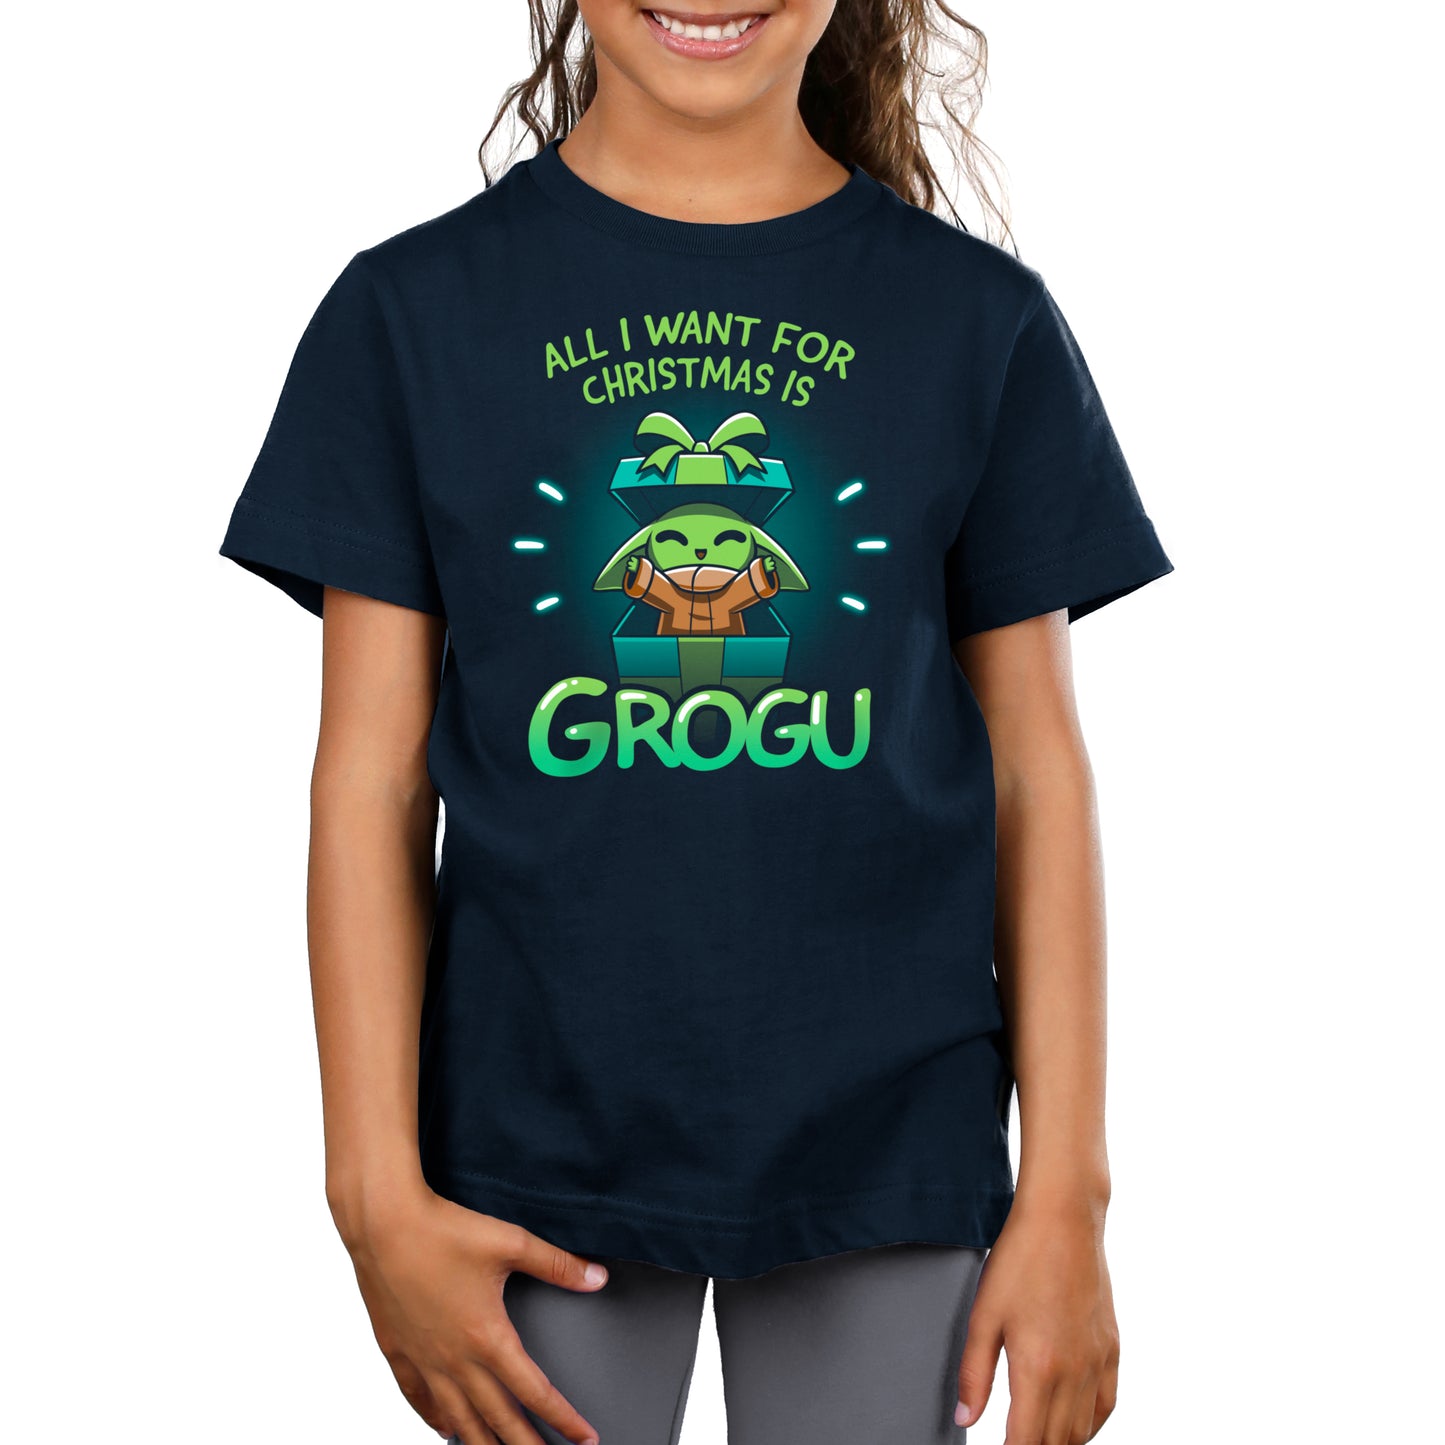 A girl proudly donning an officially licensed Star Wars t-shirt, expressing her holiday wish for All I Want For Christmas Is Grogu.